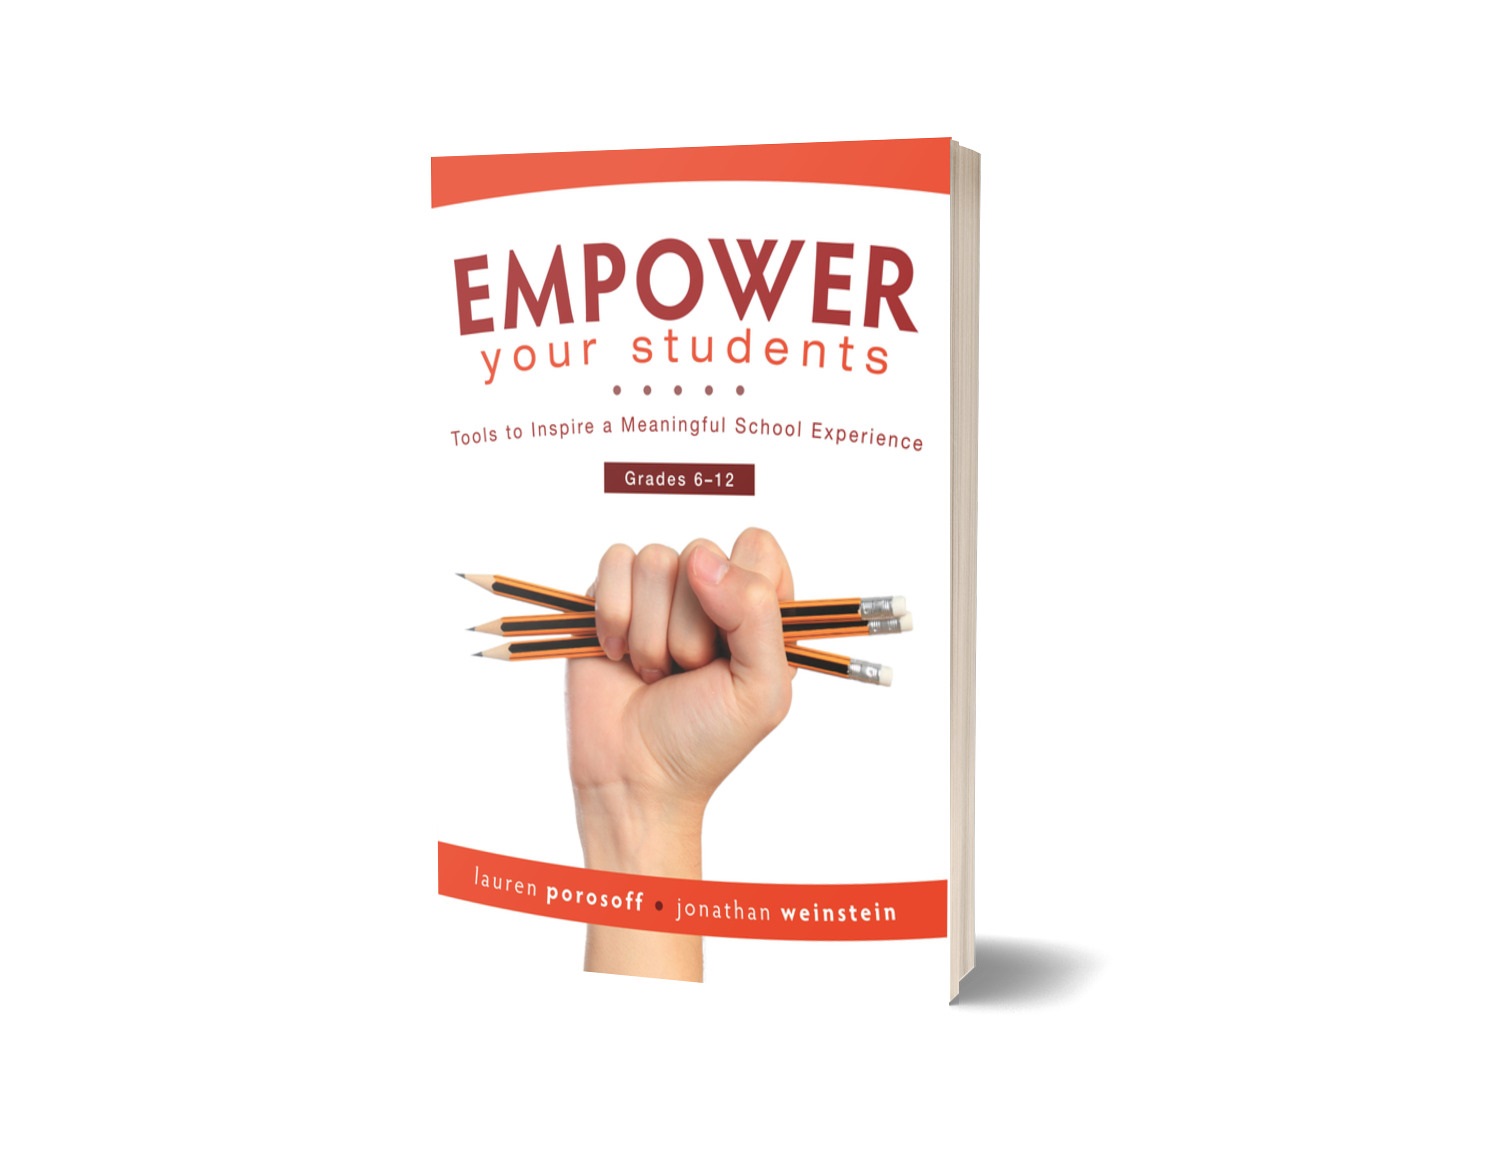 Learning　Outside　EMPOWER　Students　Box　Your　the　Resources